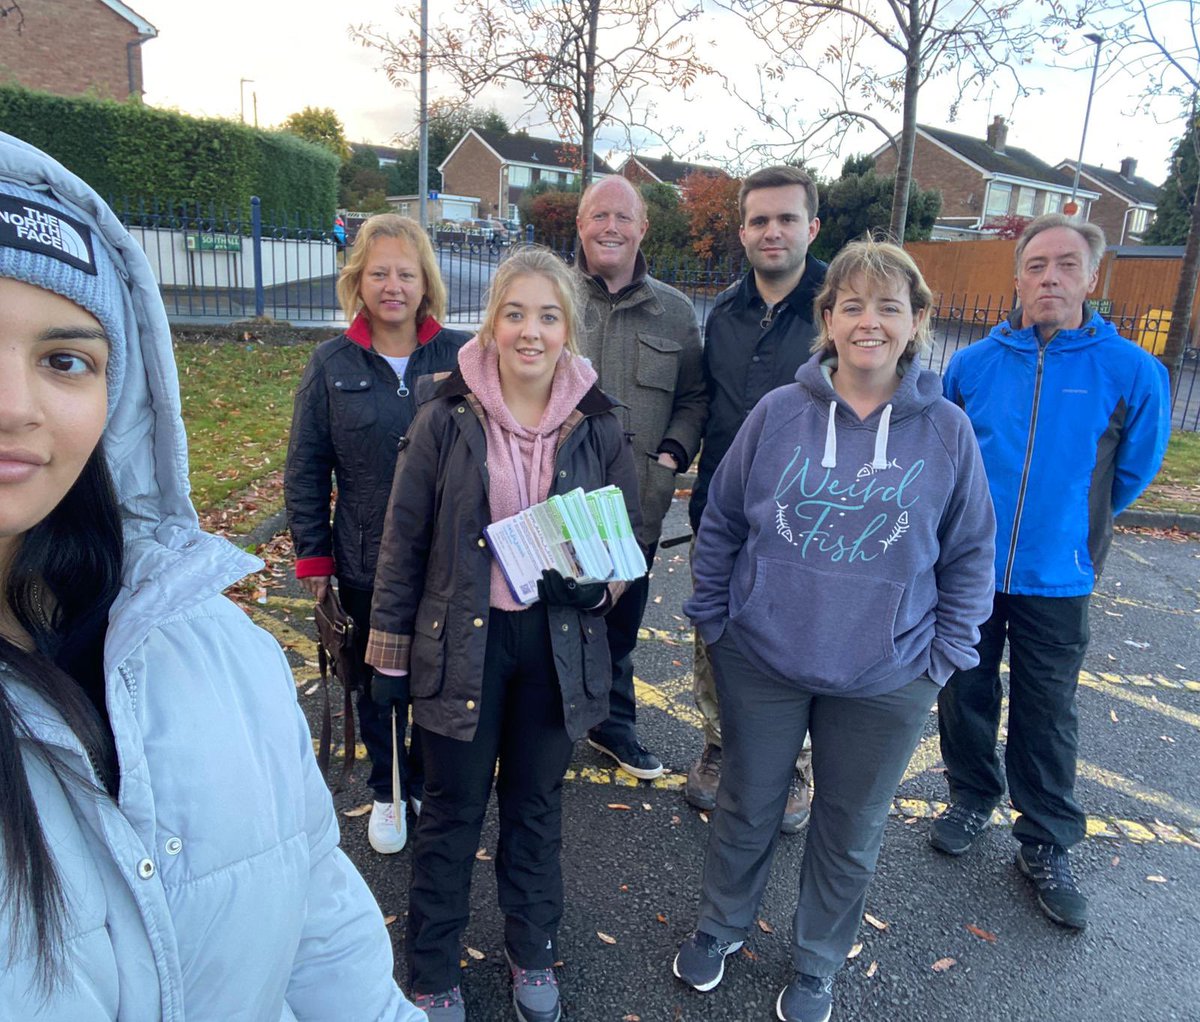 🚶 Another day, another ward to deliver newsletters to in #StokeonTrent. 📰 This weekend, the @SoTConservative team are with @heather_blurton in #EatonPark, talking to residents and picking up casework.